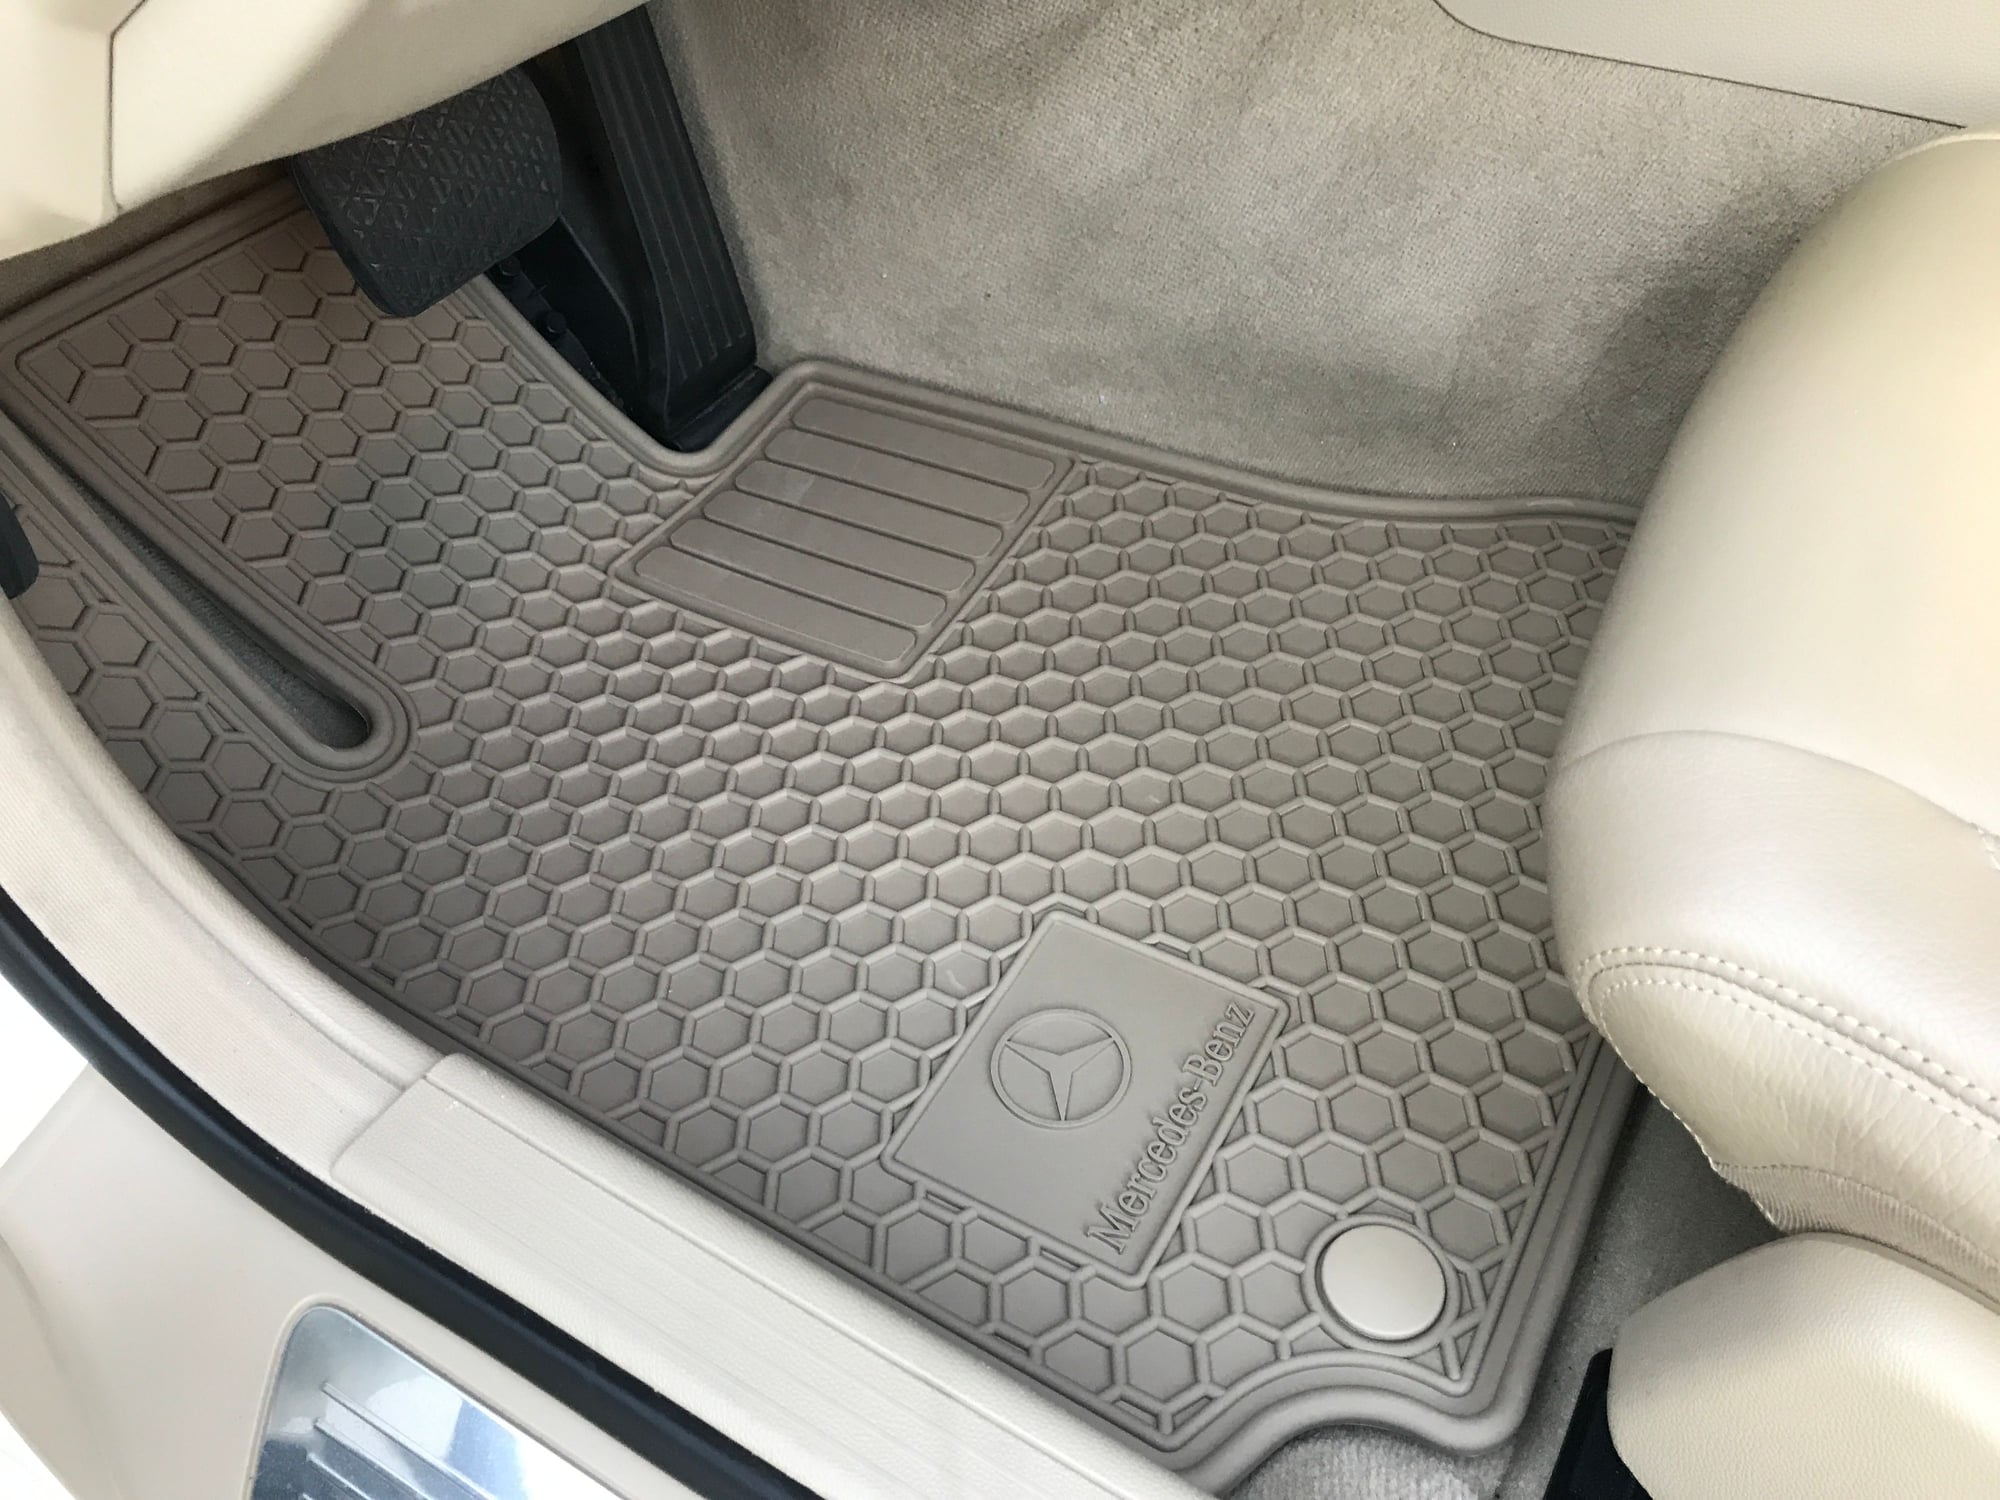 Interior/Upholstery - W207 coupe rubber floor mats beige oem - Used - 2012 Mercedes-Benz E350 - Reseda, CA 91335, United States